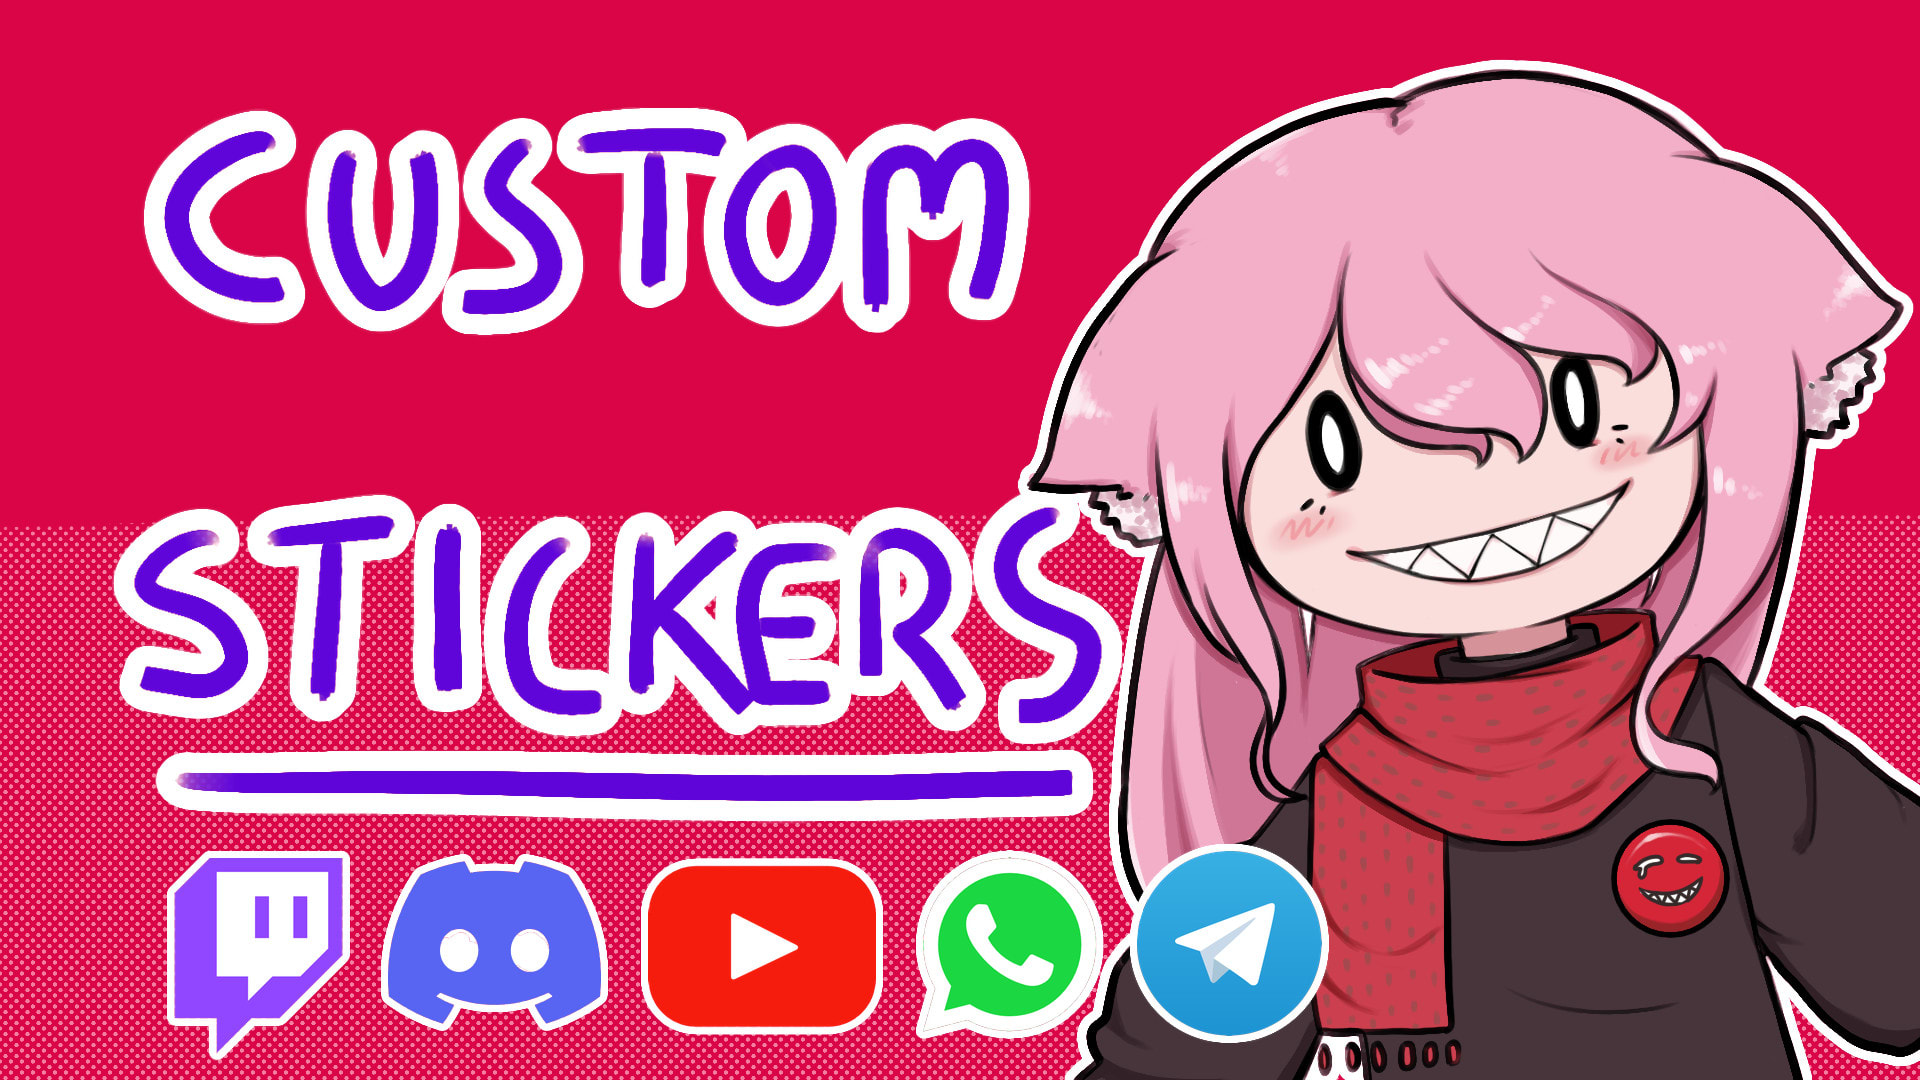 Create anime stickers for your discord twitch yt etc by Marisesekiban |  Fiverr